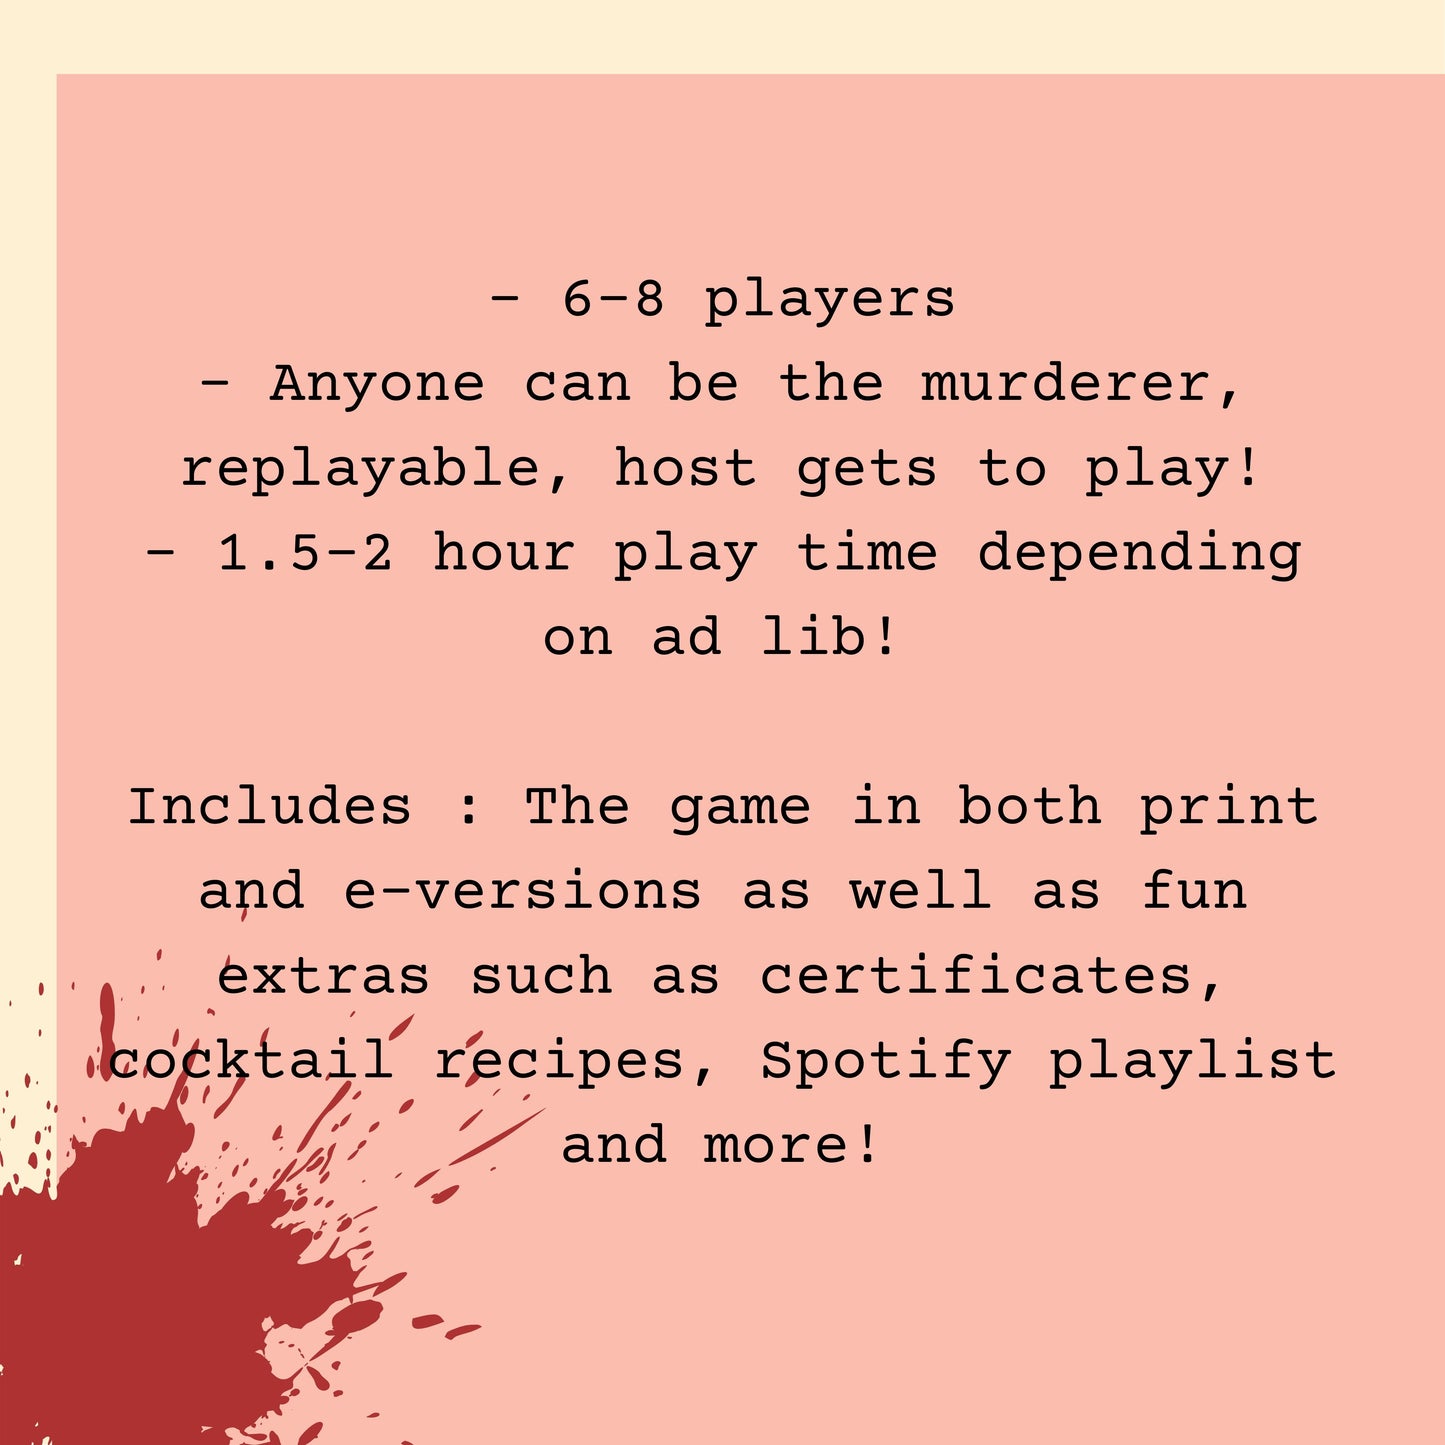 Anyone can be the murderer, replayable and the host gets to play, 2-3 hours playing time